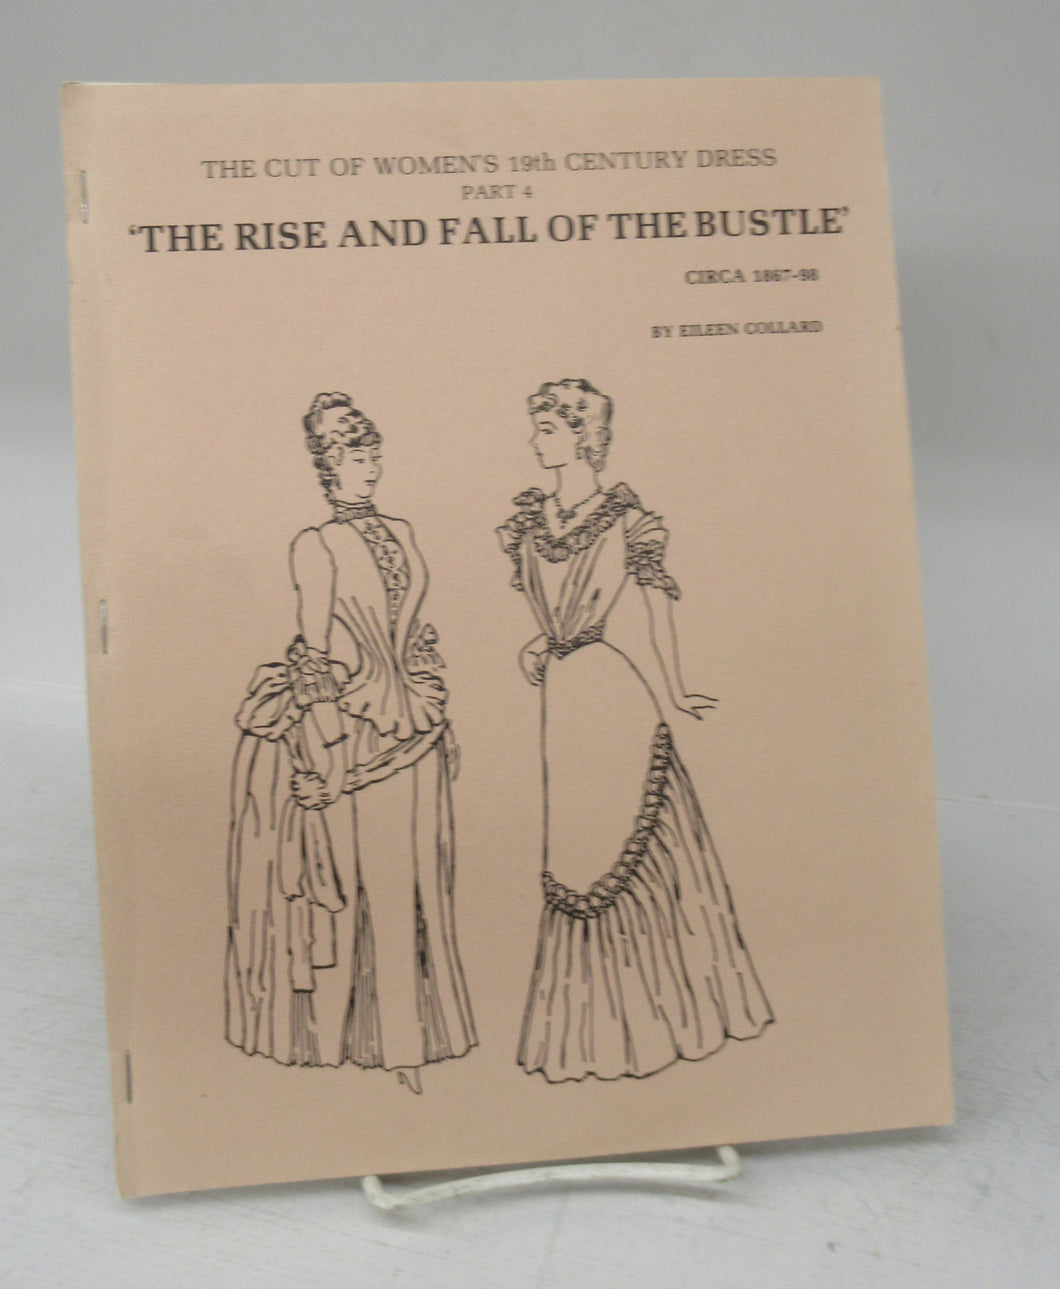 The Rise and Fall of the Bustle ca. 1867-98